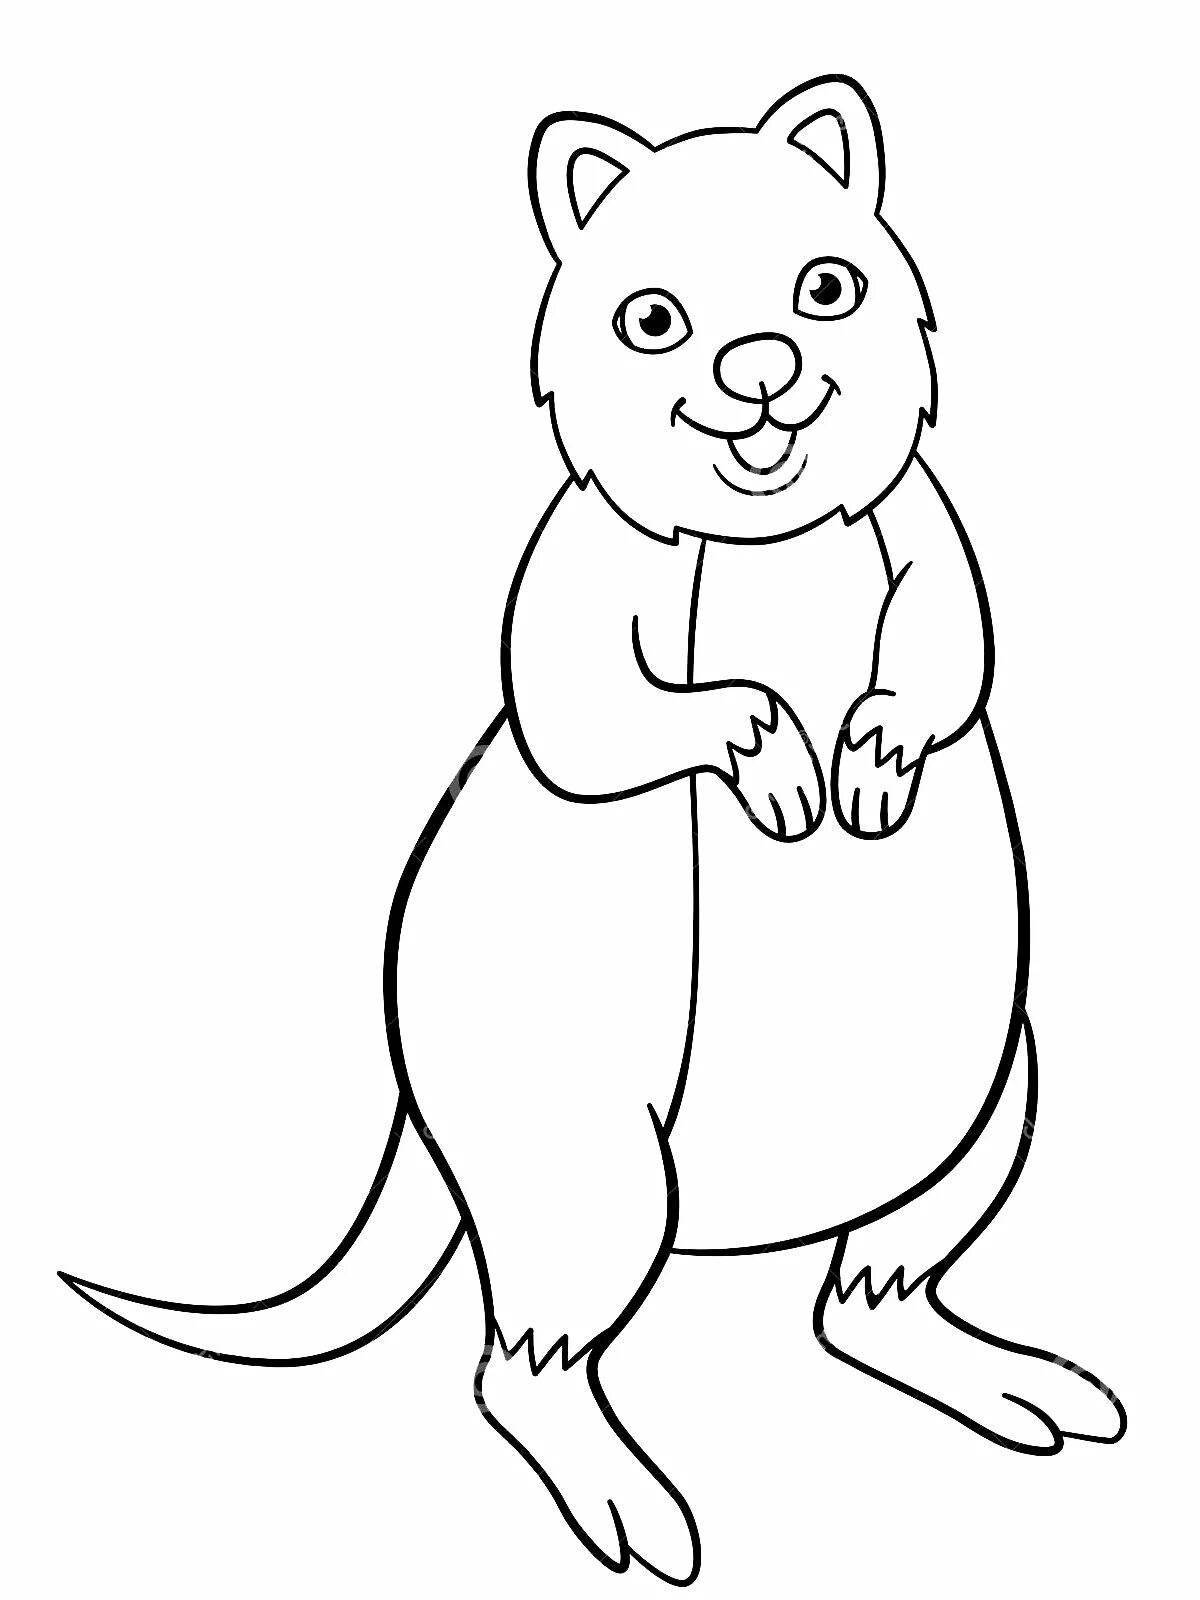 An animated quokka coloring page